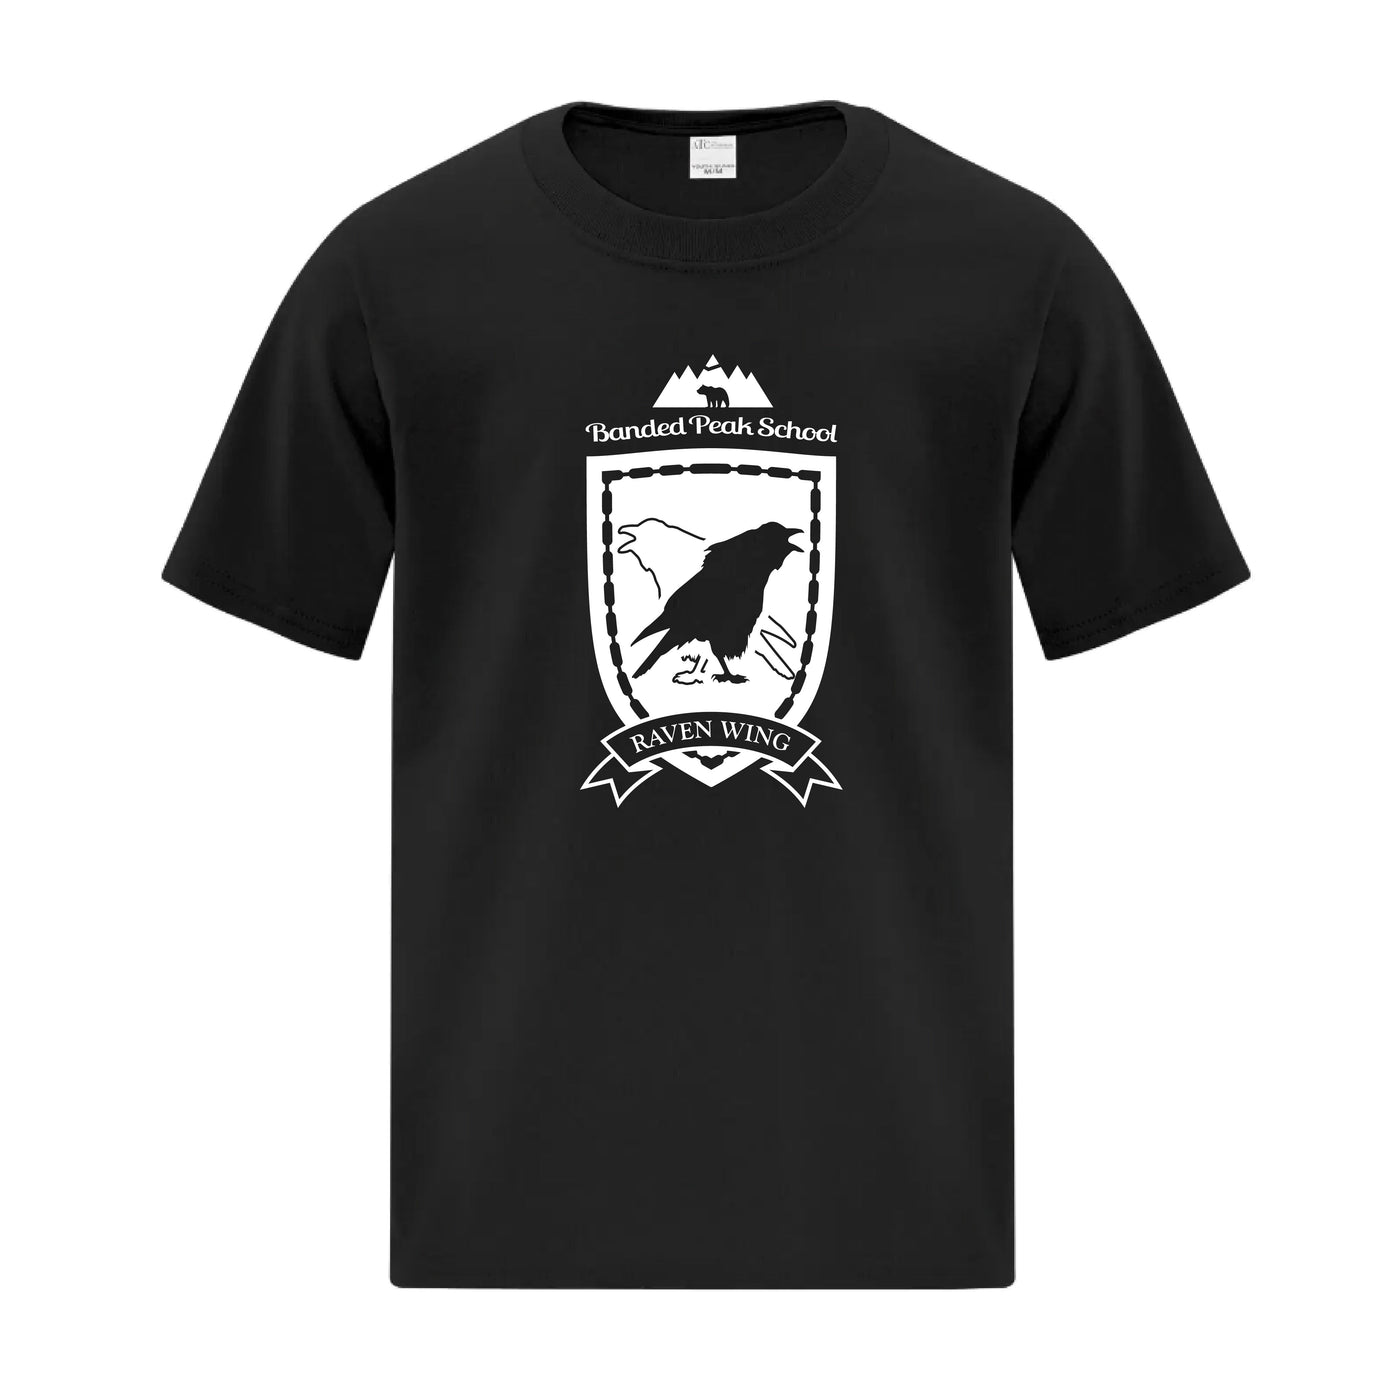 Banded Peak School - Raven Wing House Tee - Technical T-Shirt